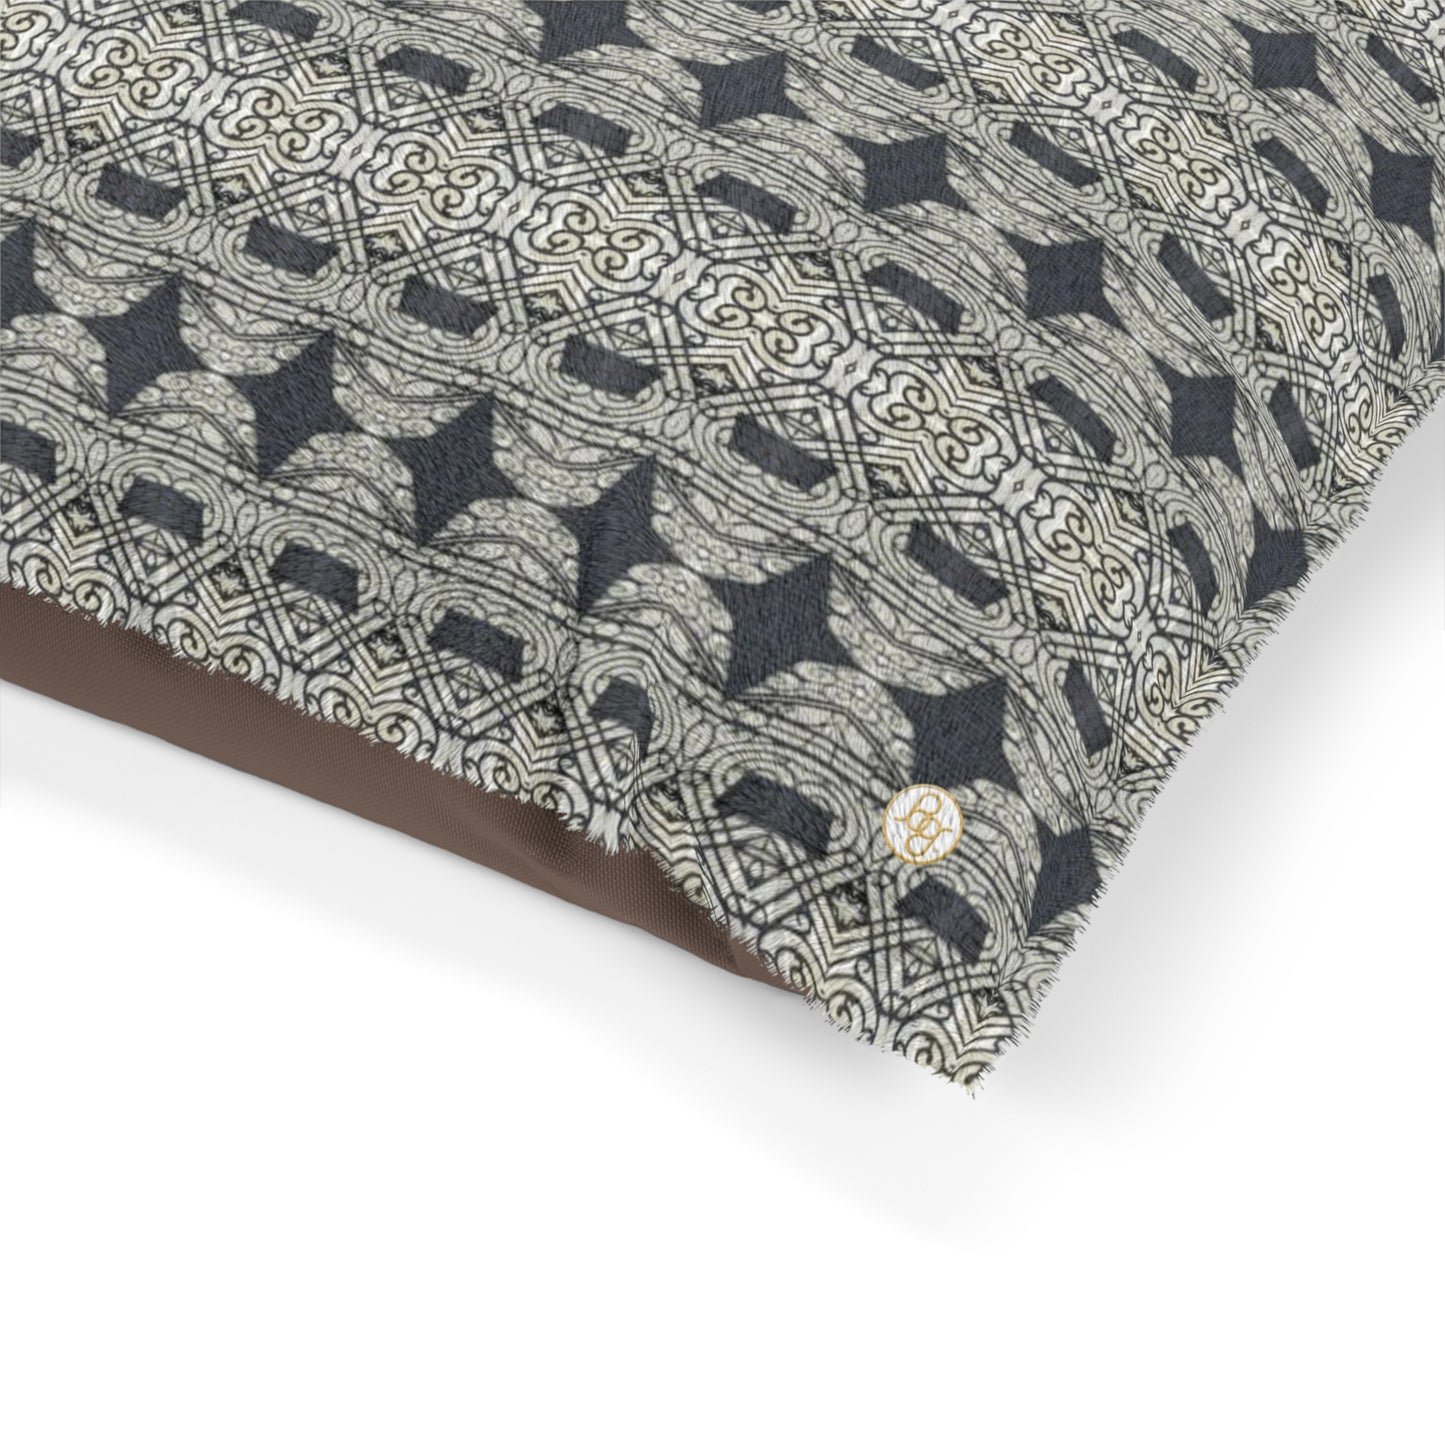 Detail view of a Fleece dog bed featuring a black and gray abstract pattern